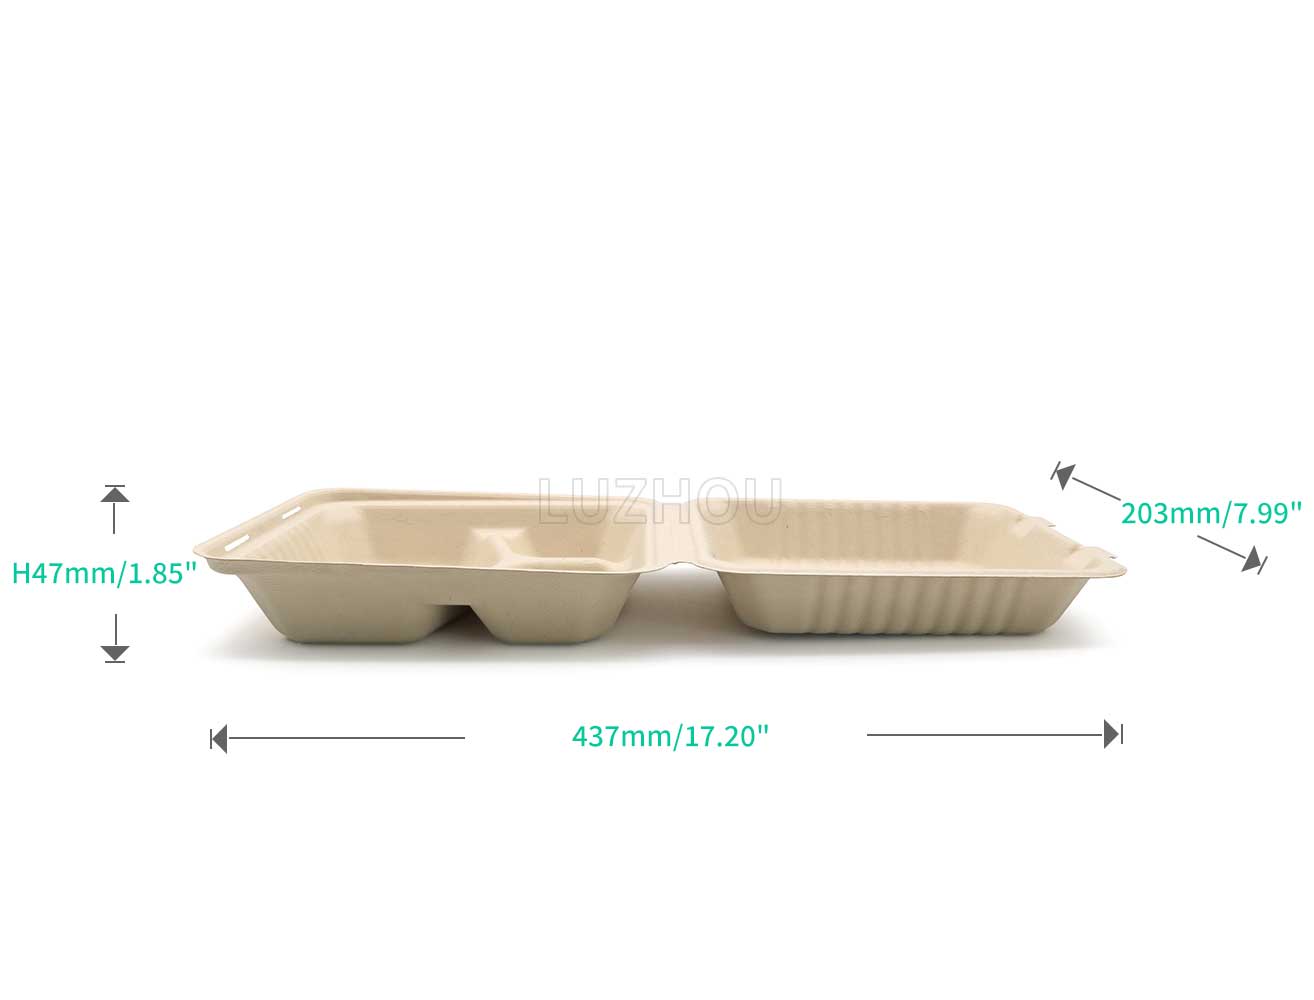 1000ml 8.66"x7.99"xH2.99" (Fold) 37g 3-Comp Bagasse Biodegradable Compostable Take Away Container Box